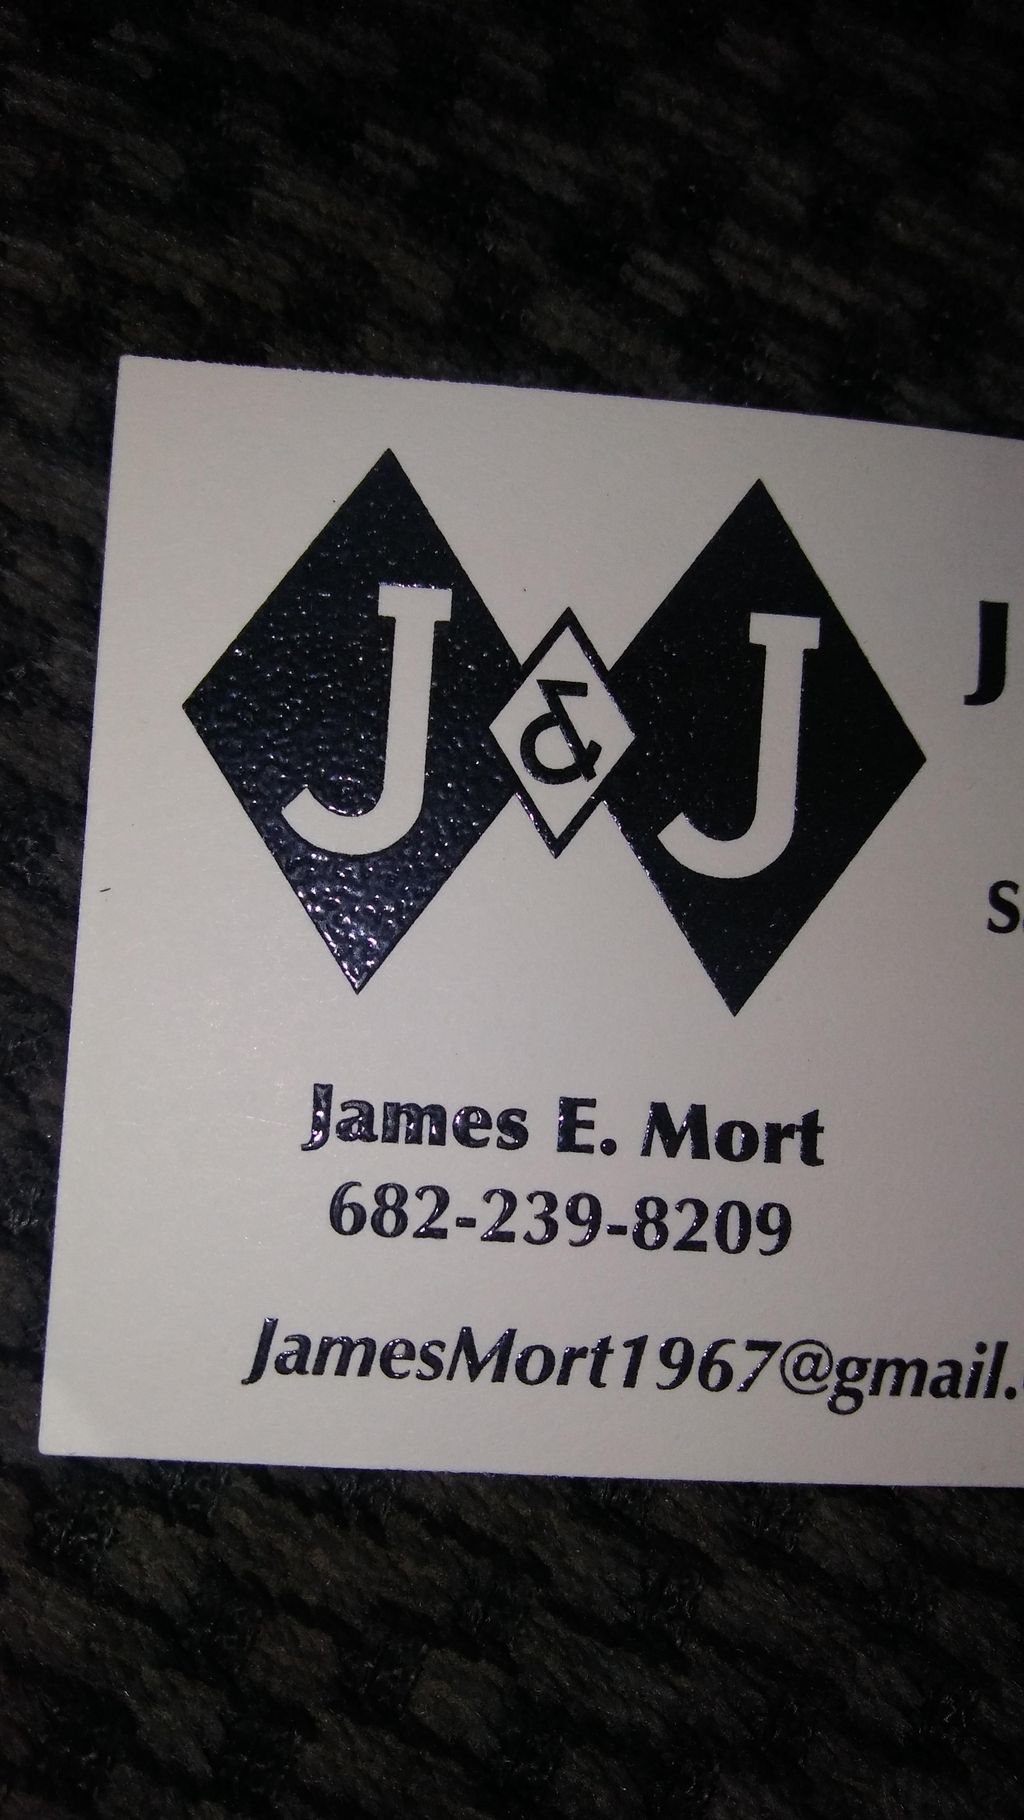 J and J heating and air conditioning